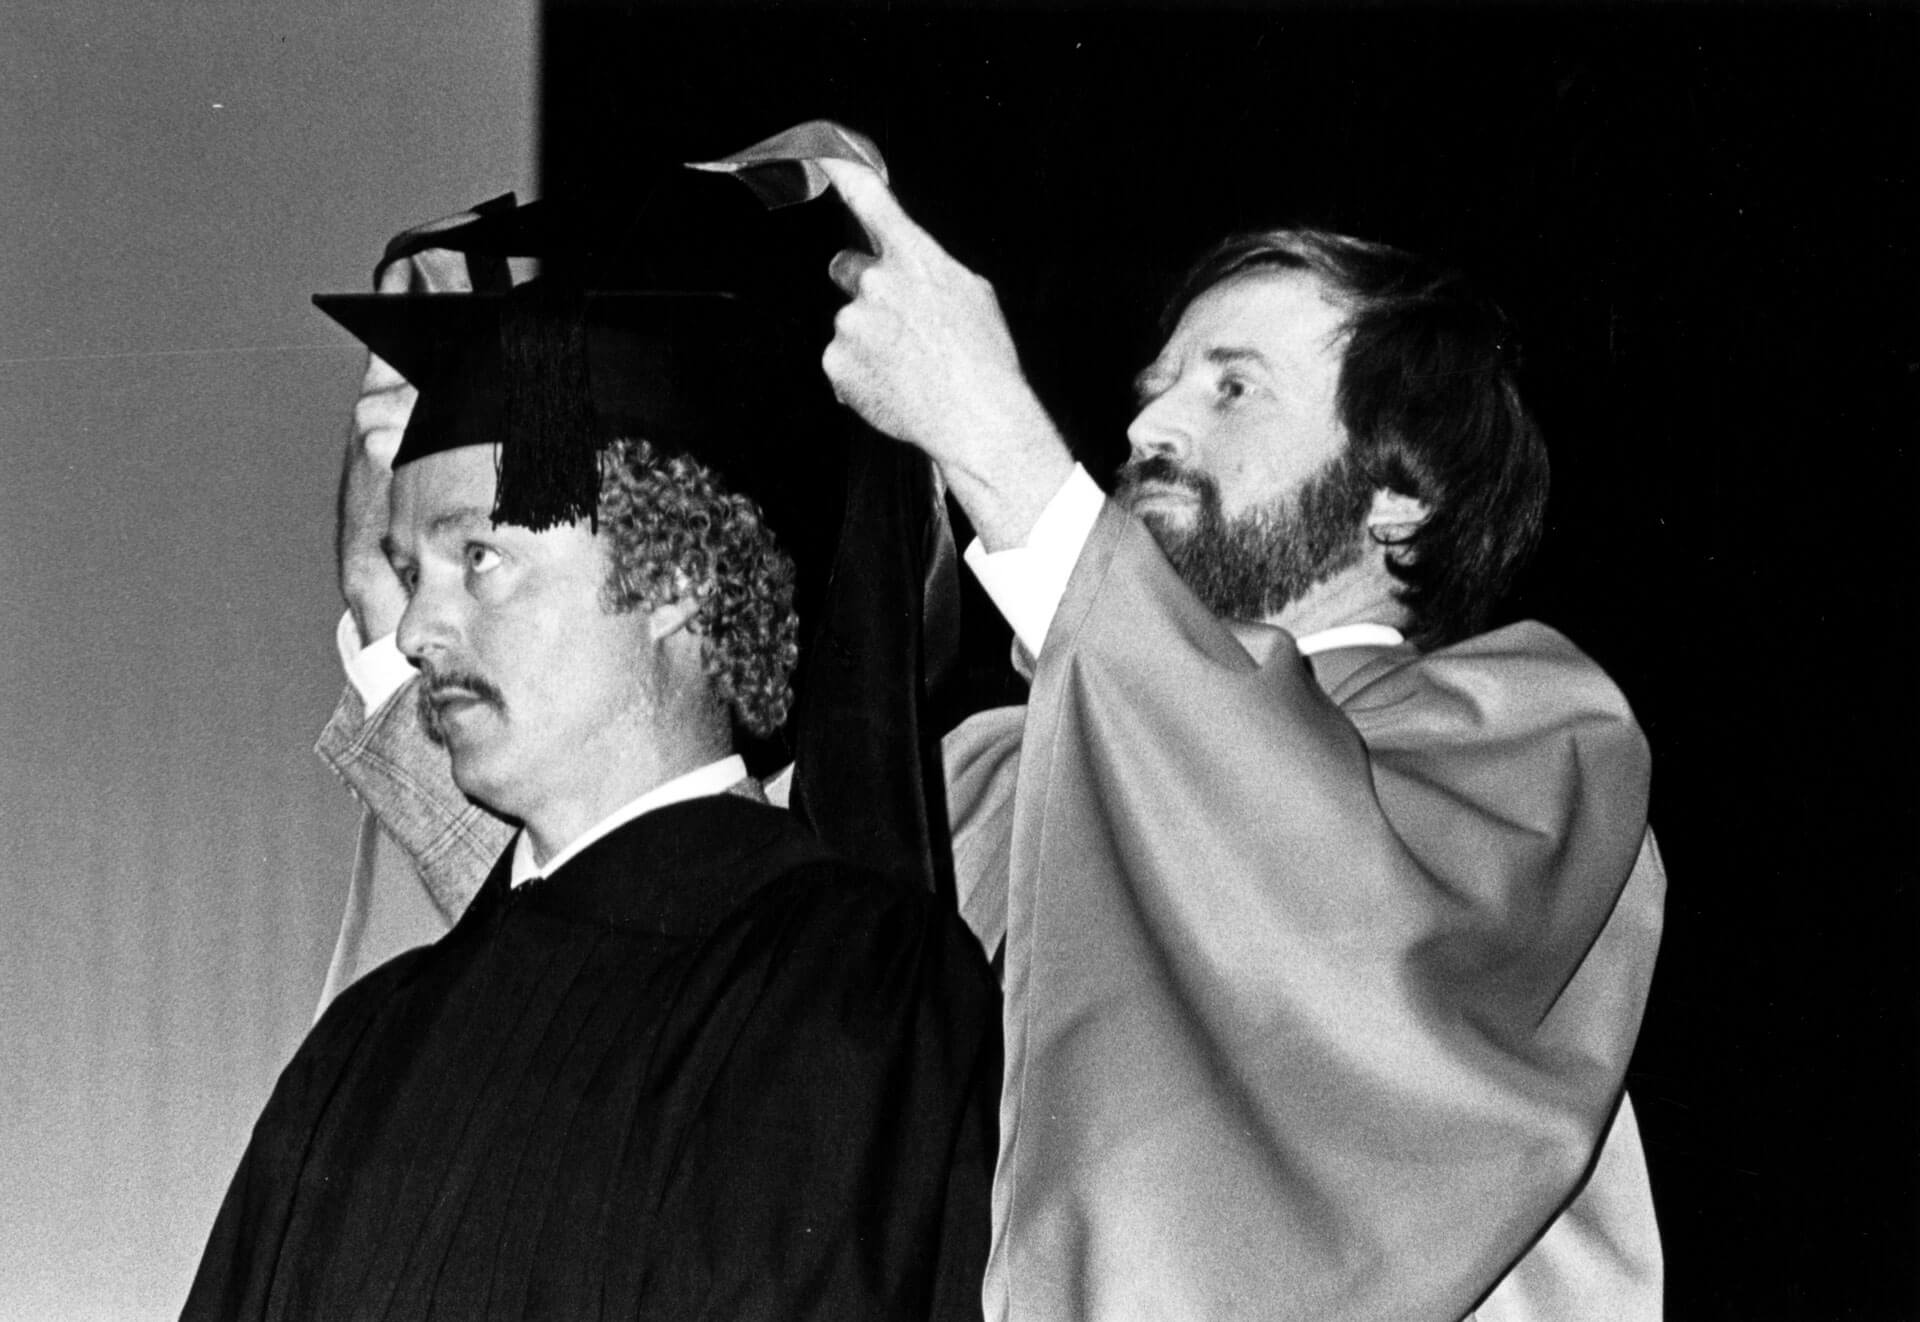 Neil Henry places a convocation hood on the shoulders of a university graduate circa 1980.